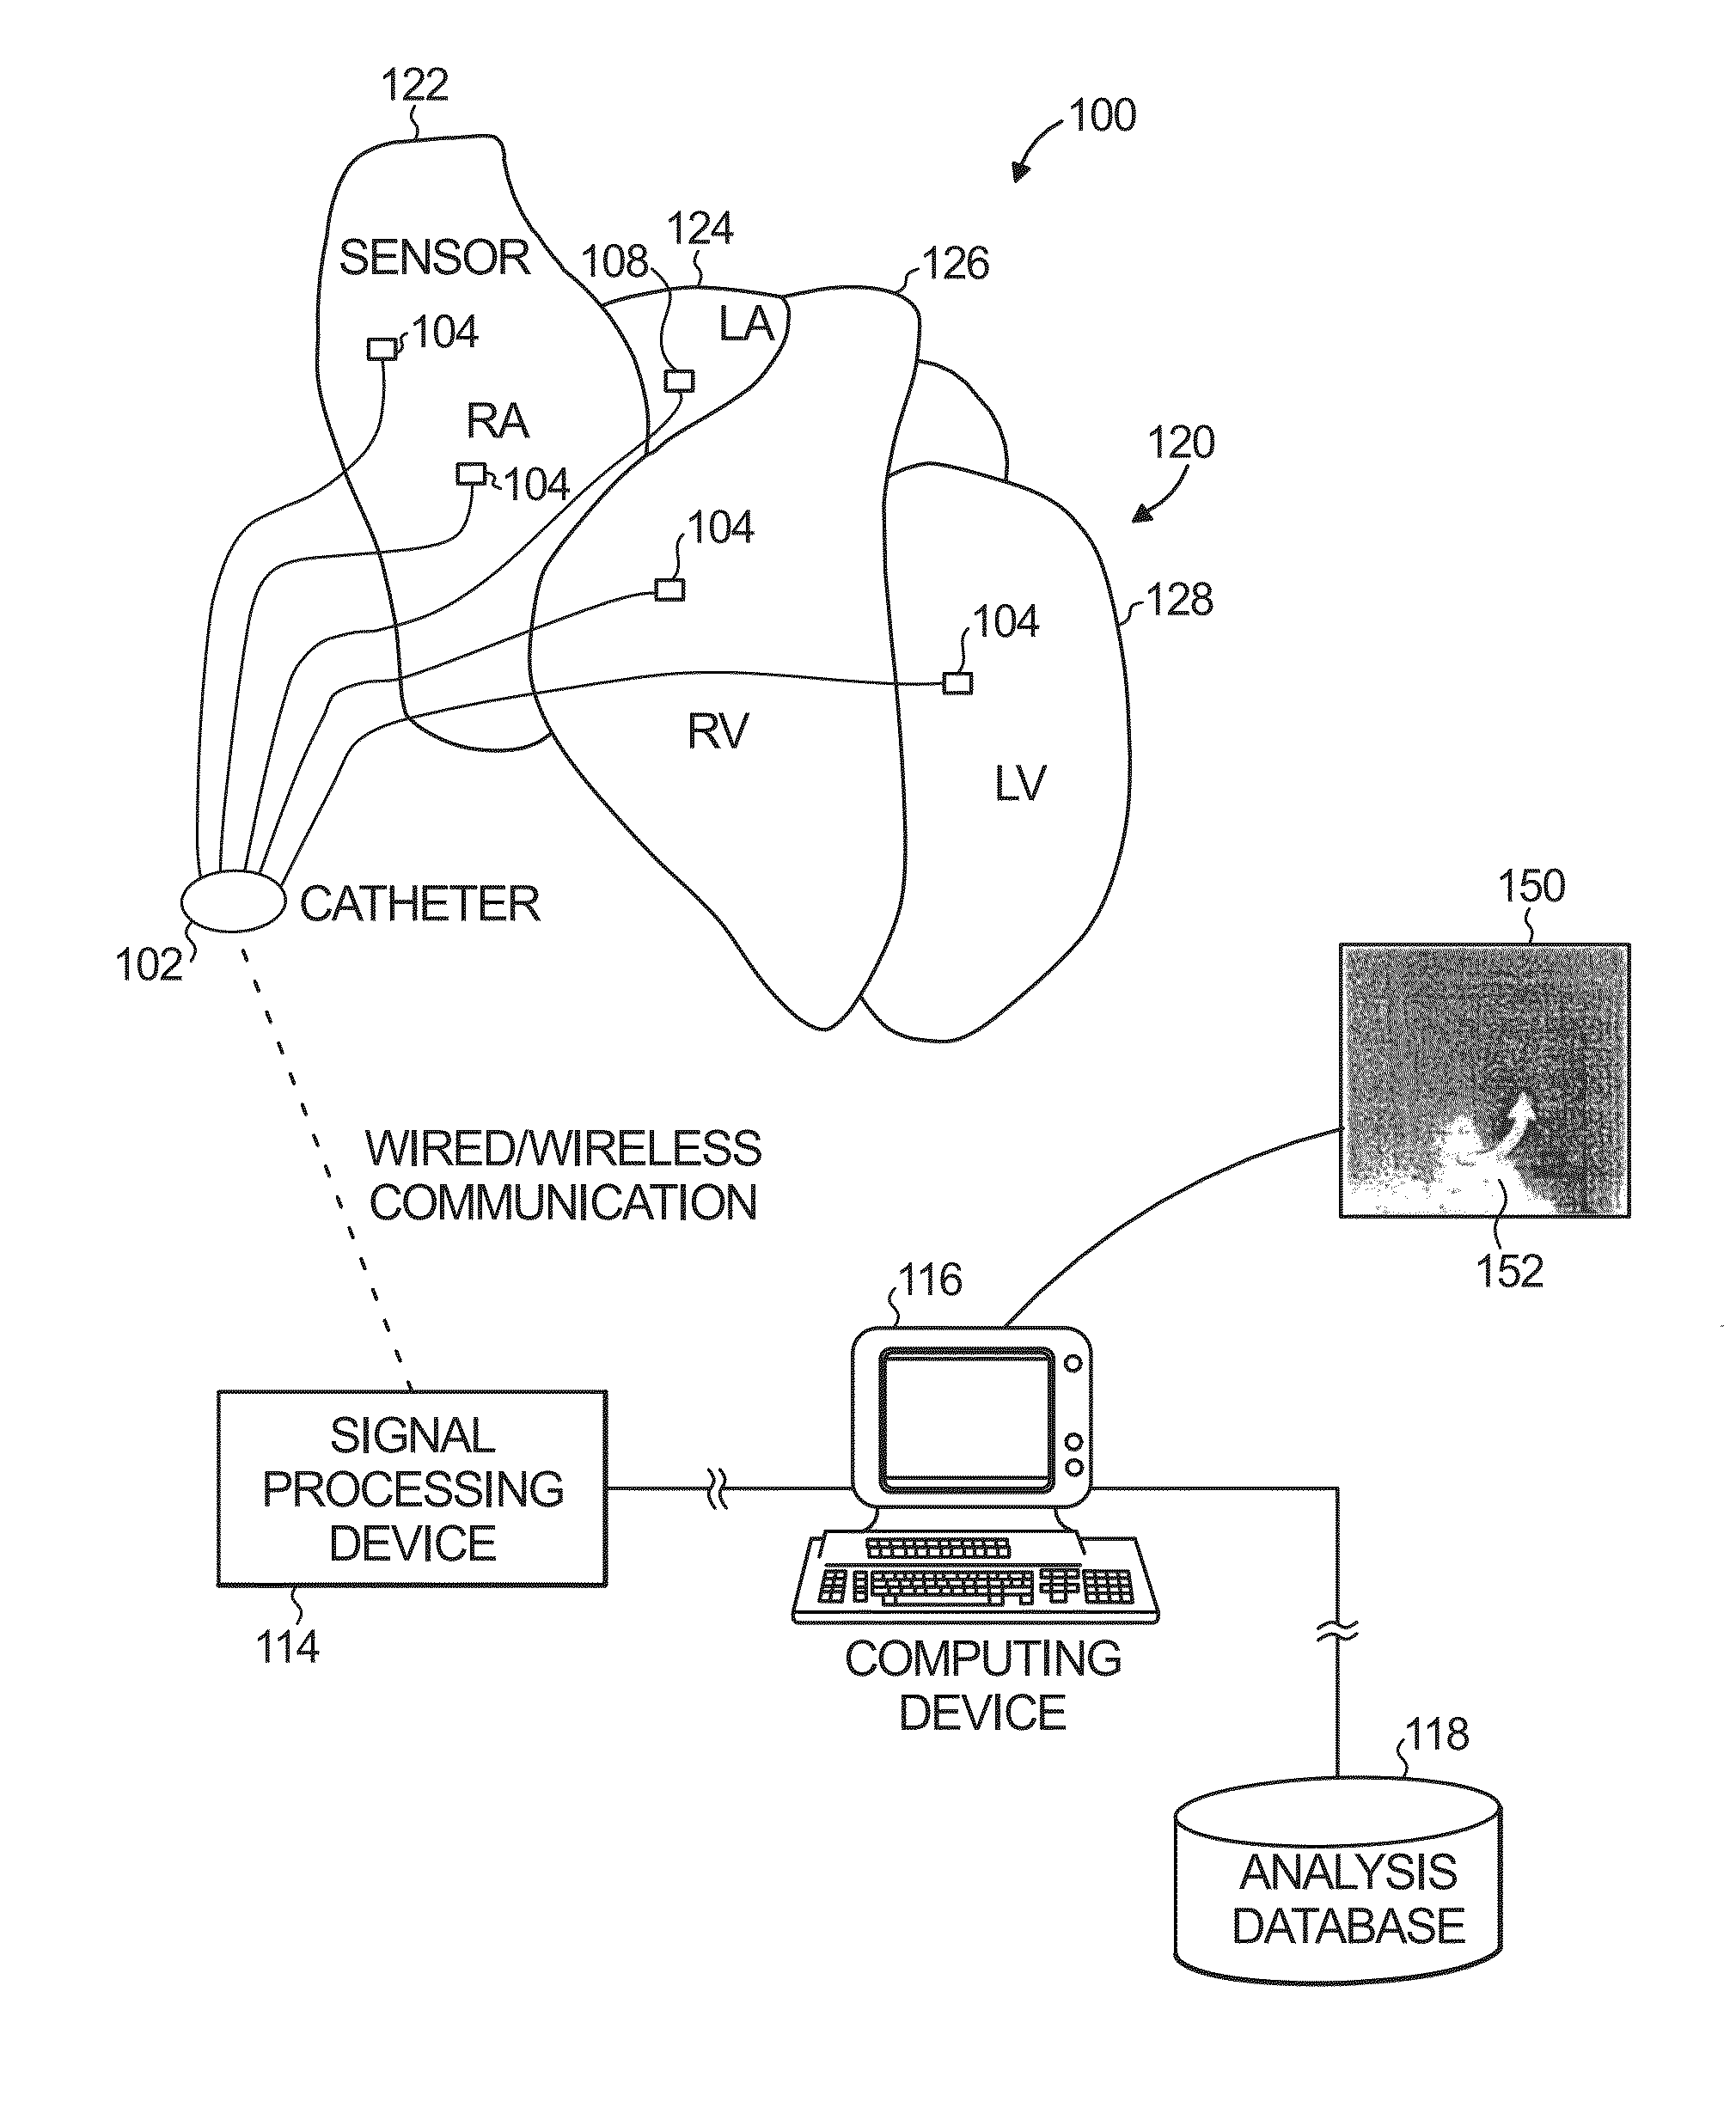 System and method to identify sources associated with biological rhythm disorders